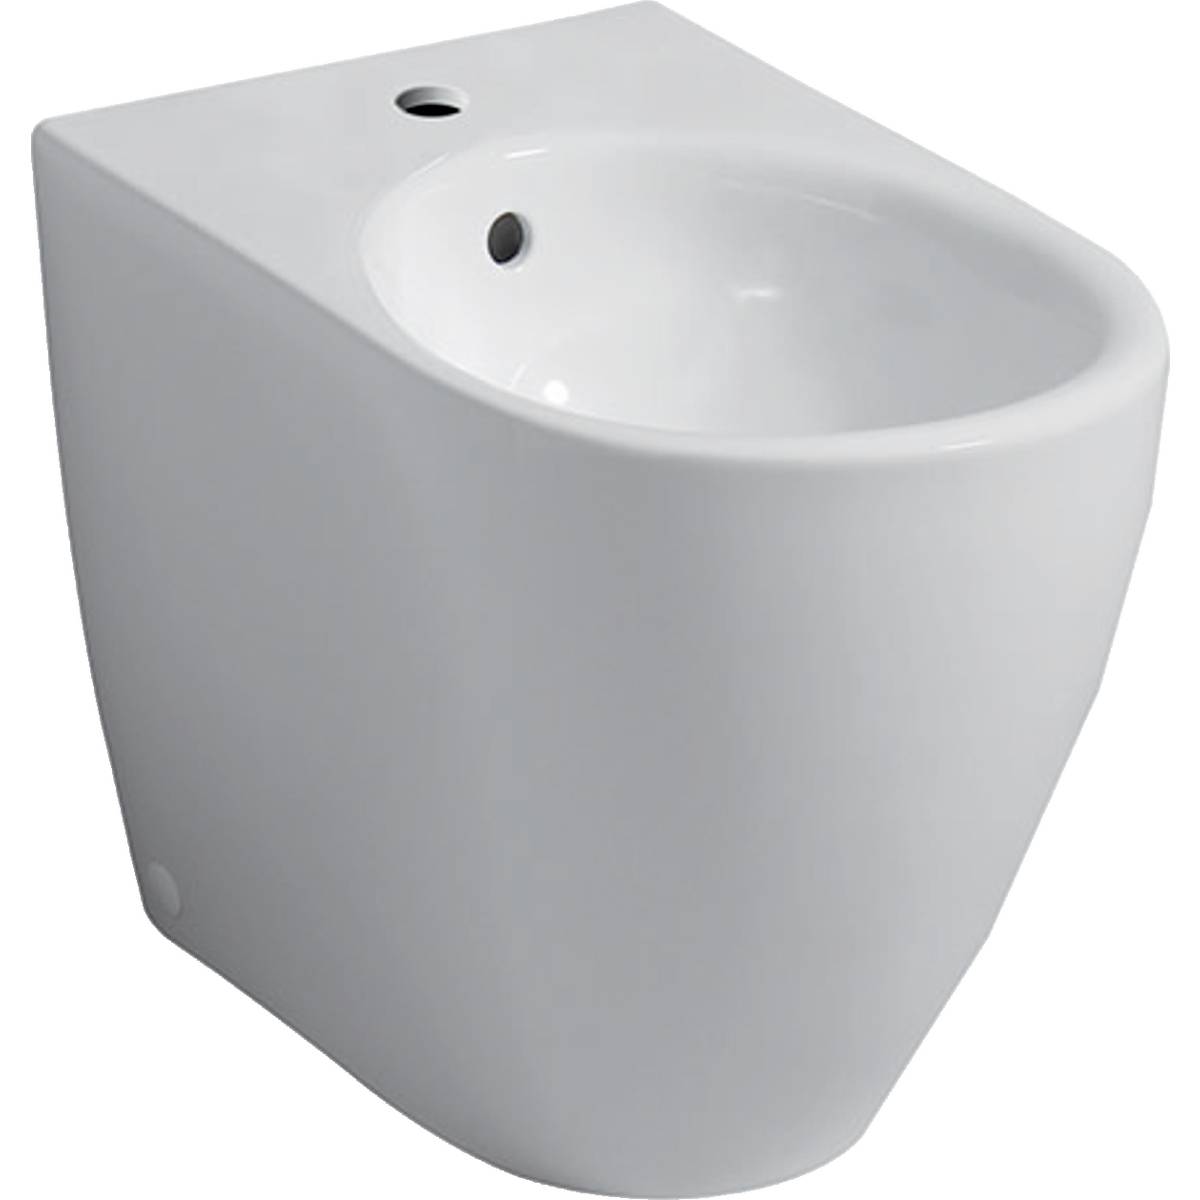 iCon floor-standing bidet, back-to-wall, shrouded